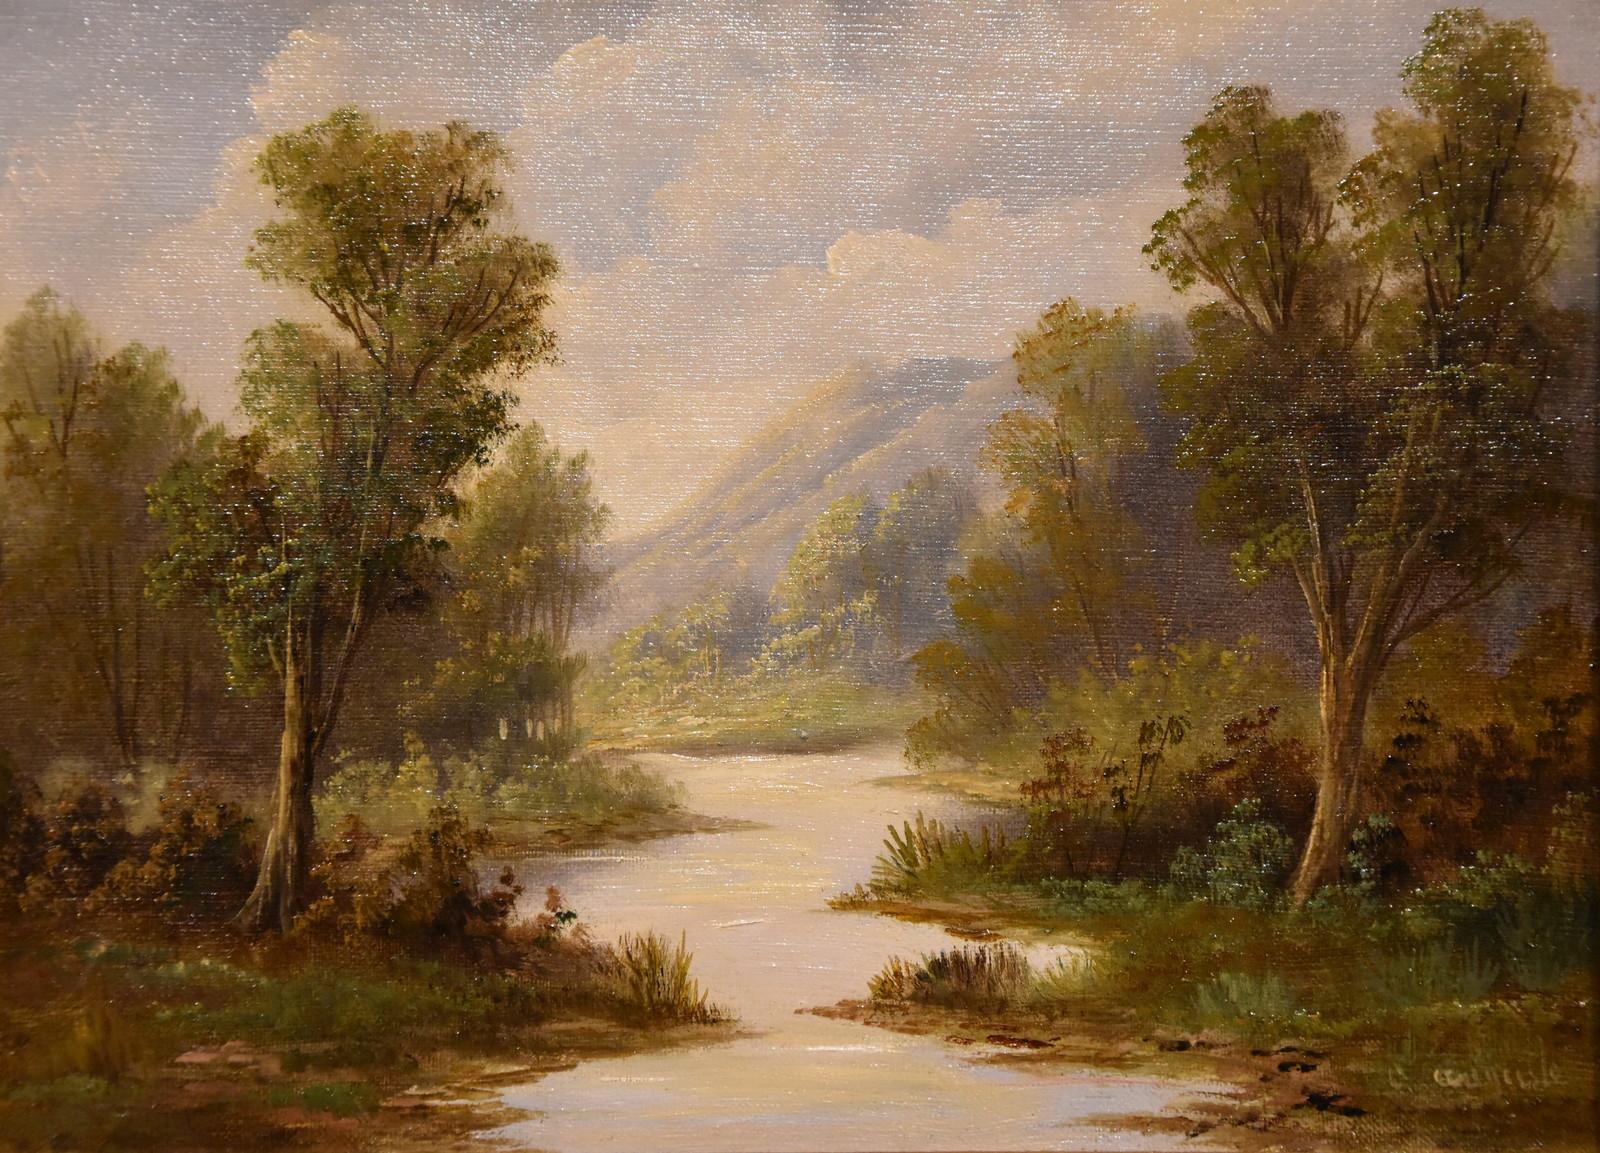 Oil Painting by A Auguste "A Tranquil River Landscape" flourished 1900 -1910 A well- executed landscape of the Edwardian era when the colour palette was softening and brushstrokes were becoming more impressionistic. Oil on canvas. Signed